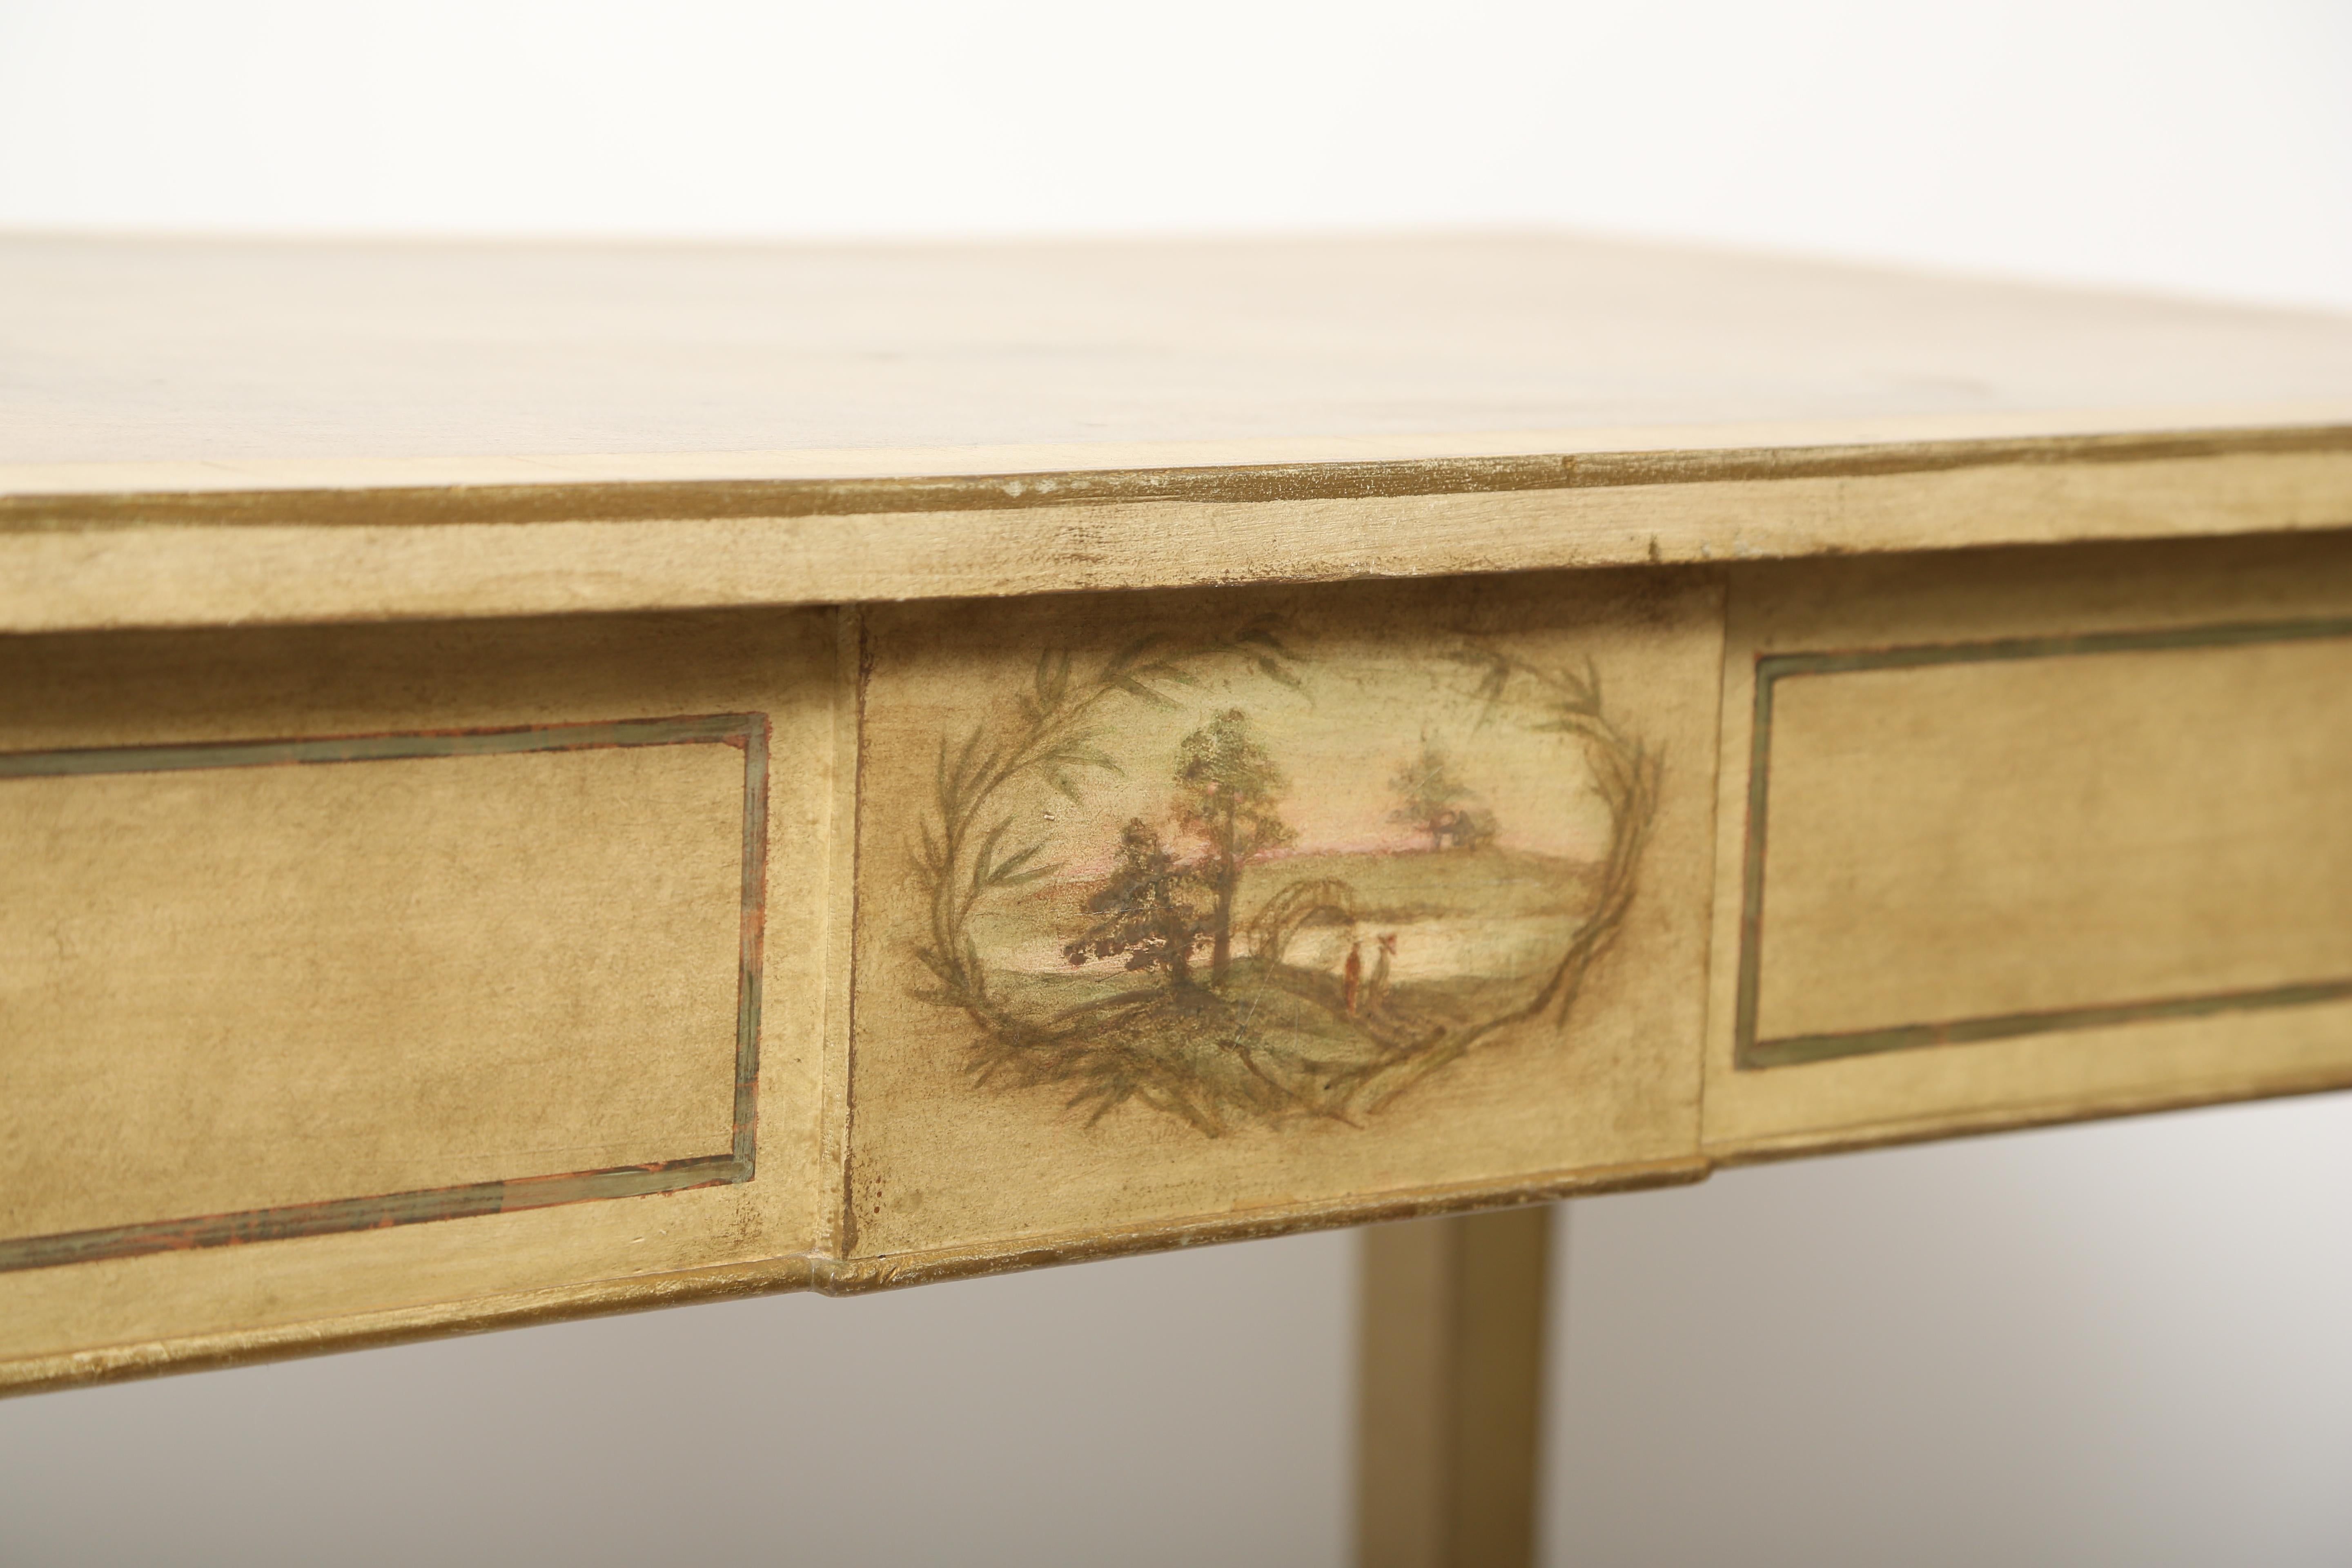  The tables are 19th century mahogany and later decorated in the mid-20th century. The top is painted as faux parchment. Each table has its own hand-painted scene on the apron. All surfaces are outlined with a fine gold line. The legs are square and